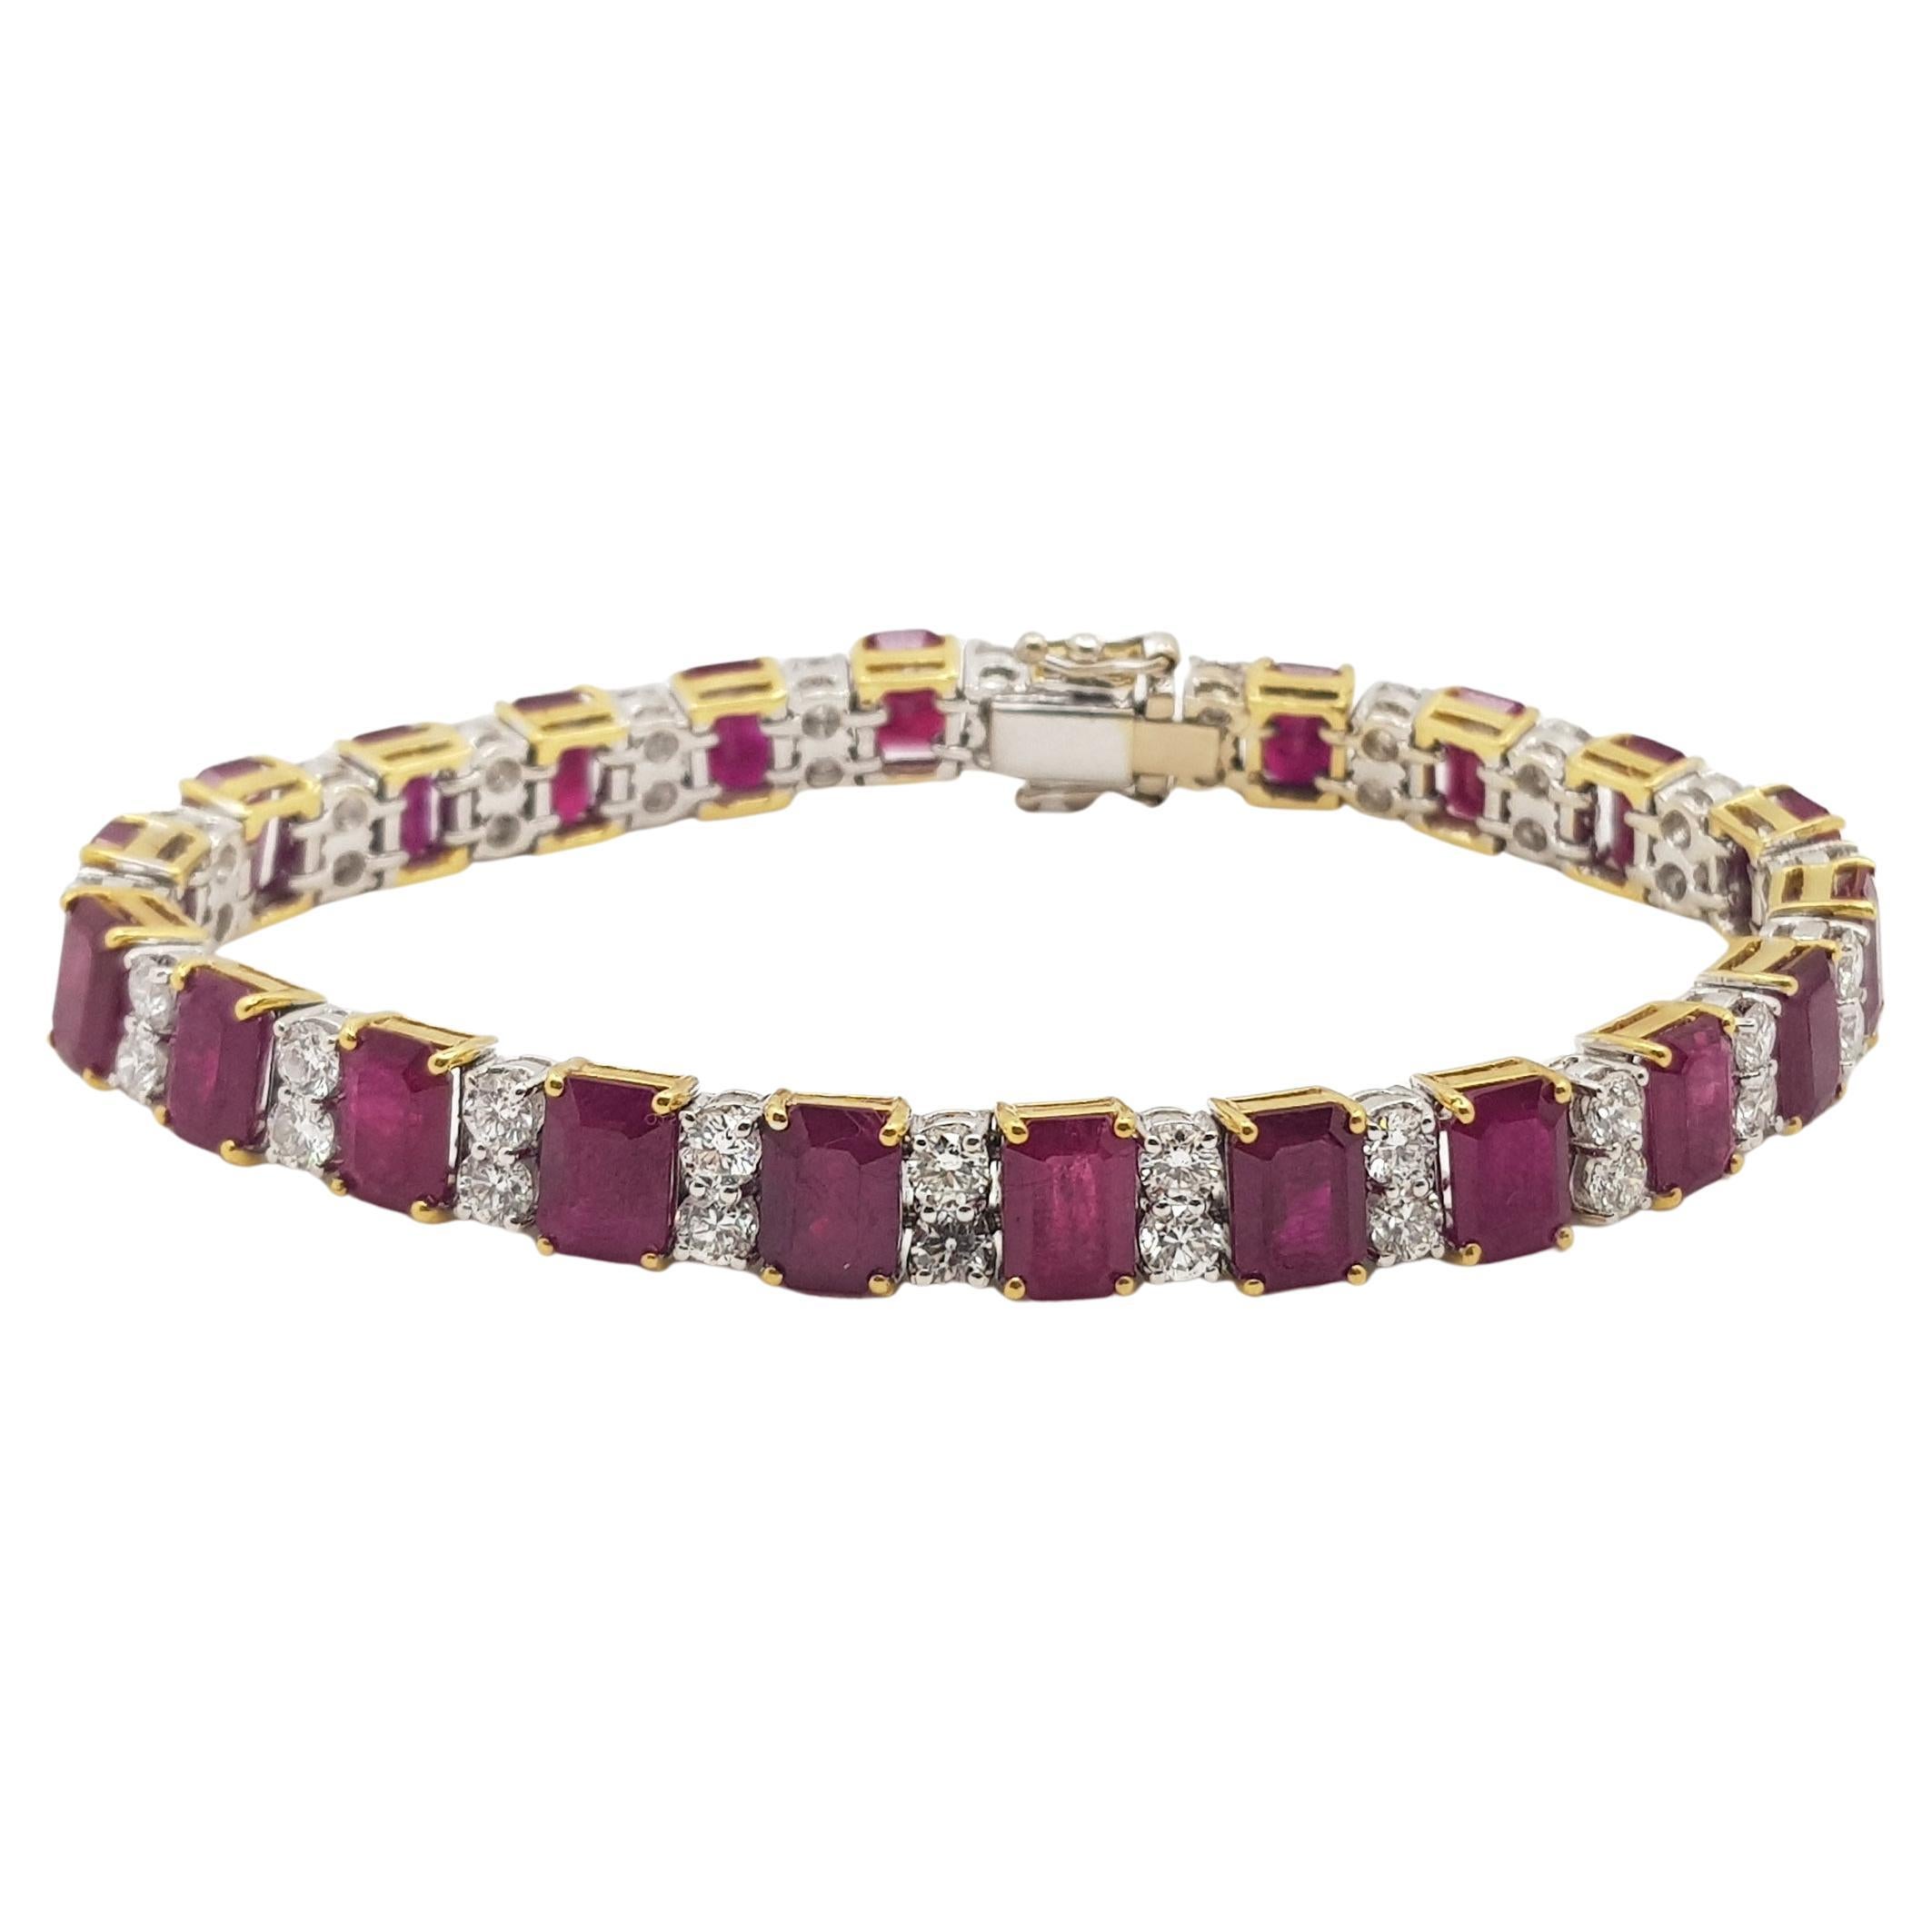 18ct Two Tone Gold Burmese Ruby & 4.5ct TW Diamond Bracelet Val $62765 AUD For Sale